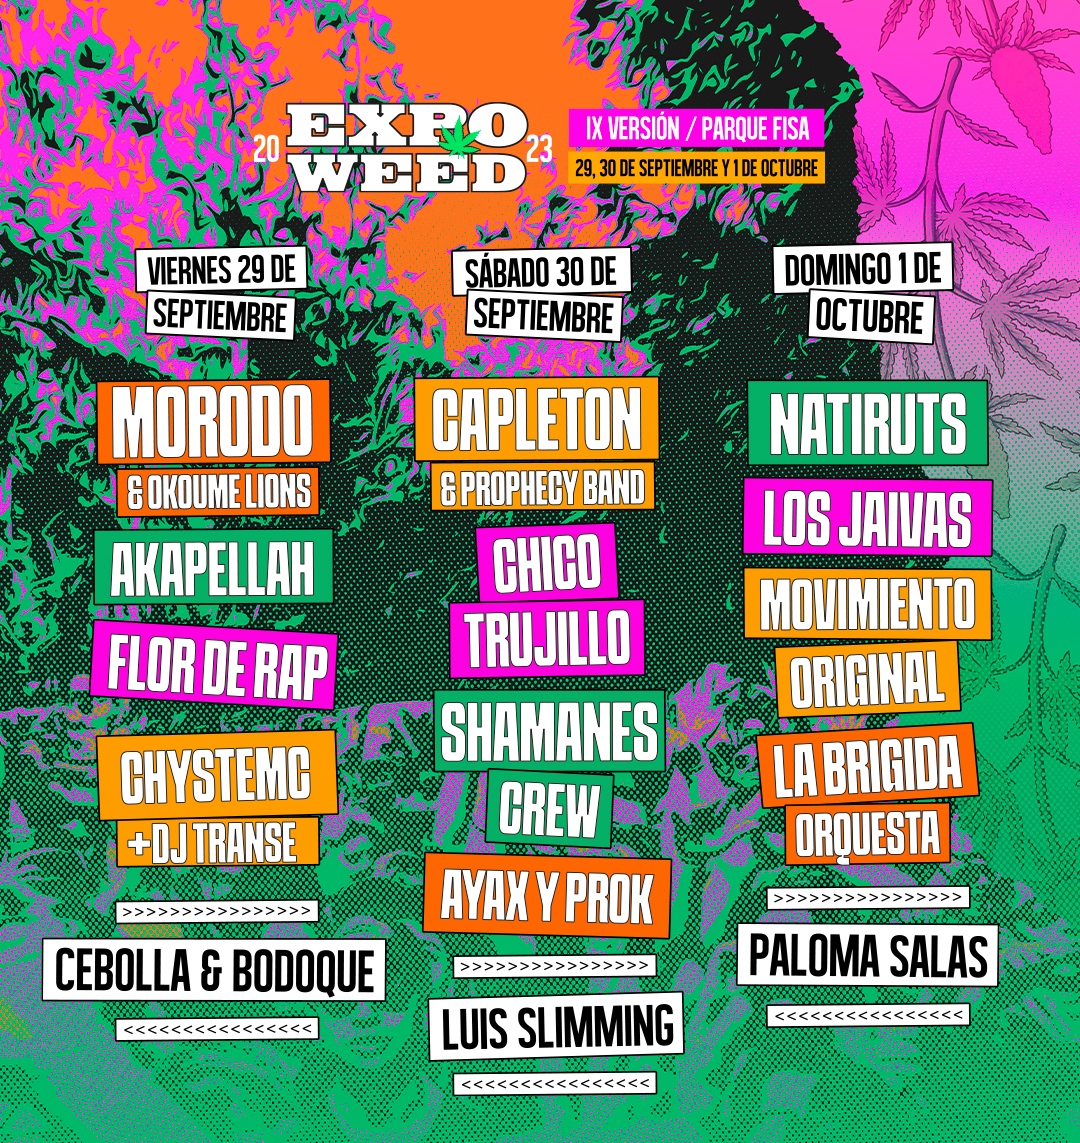 Lineup Expoweed